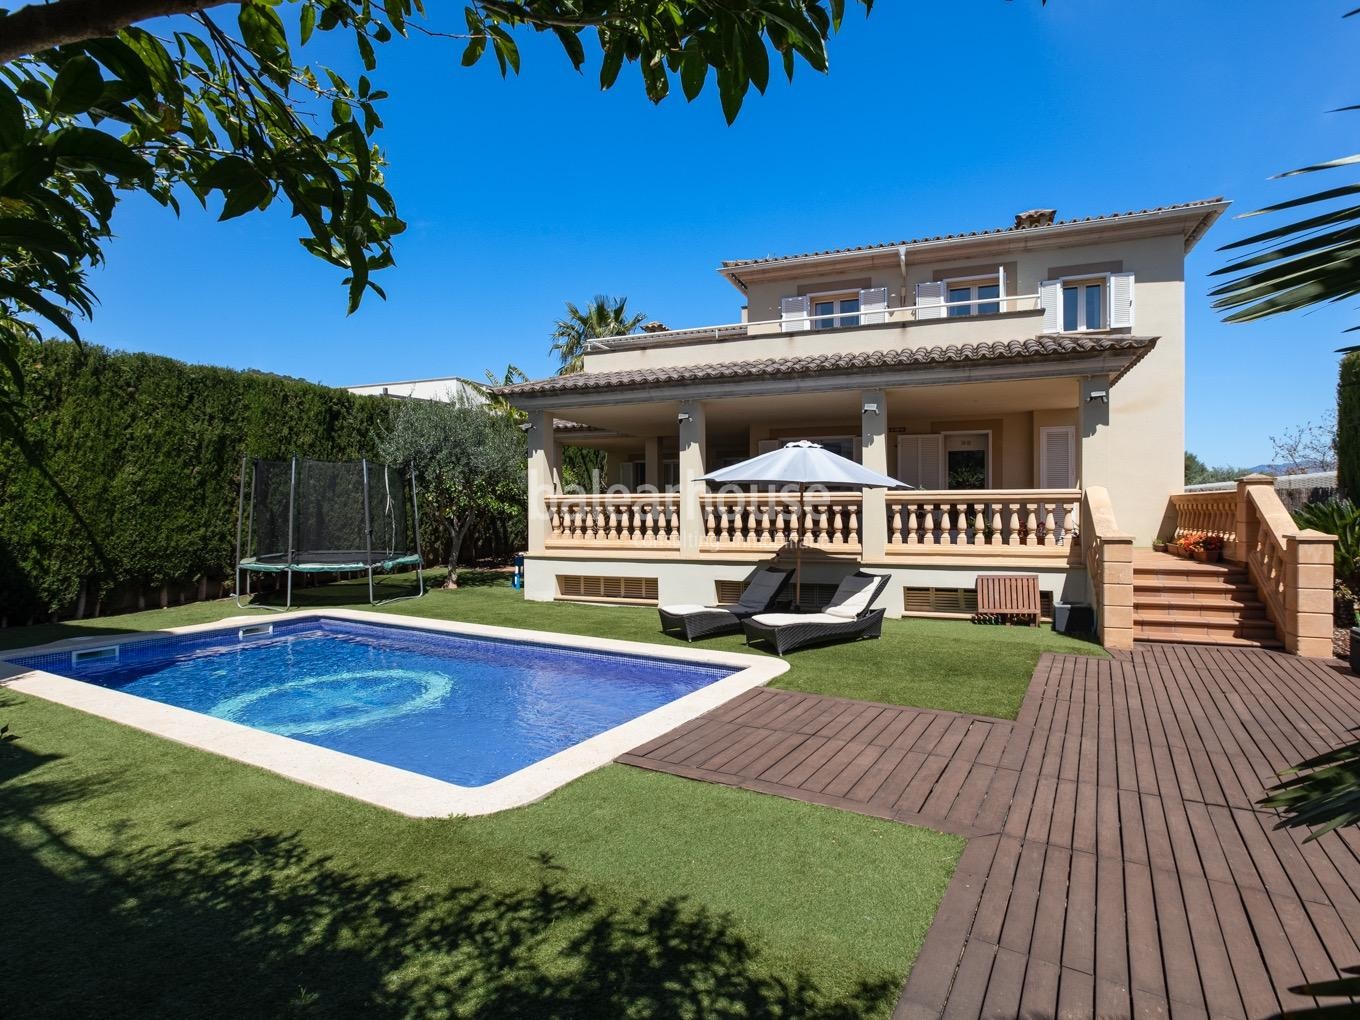 Excellent villa with sunny terraces and private pool situated in a green area close to Son Vida.